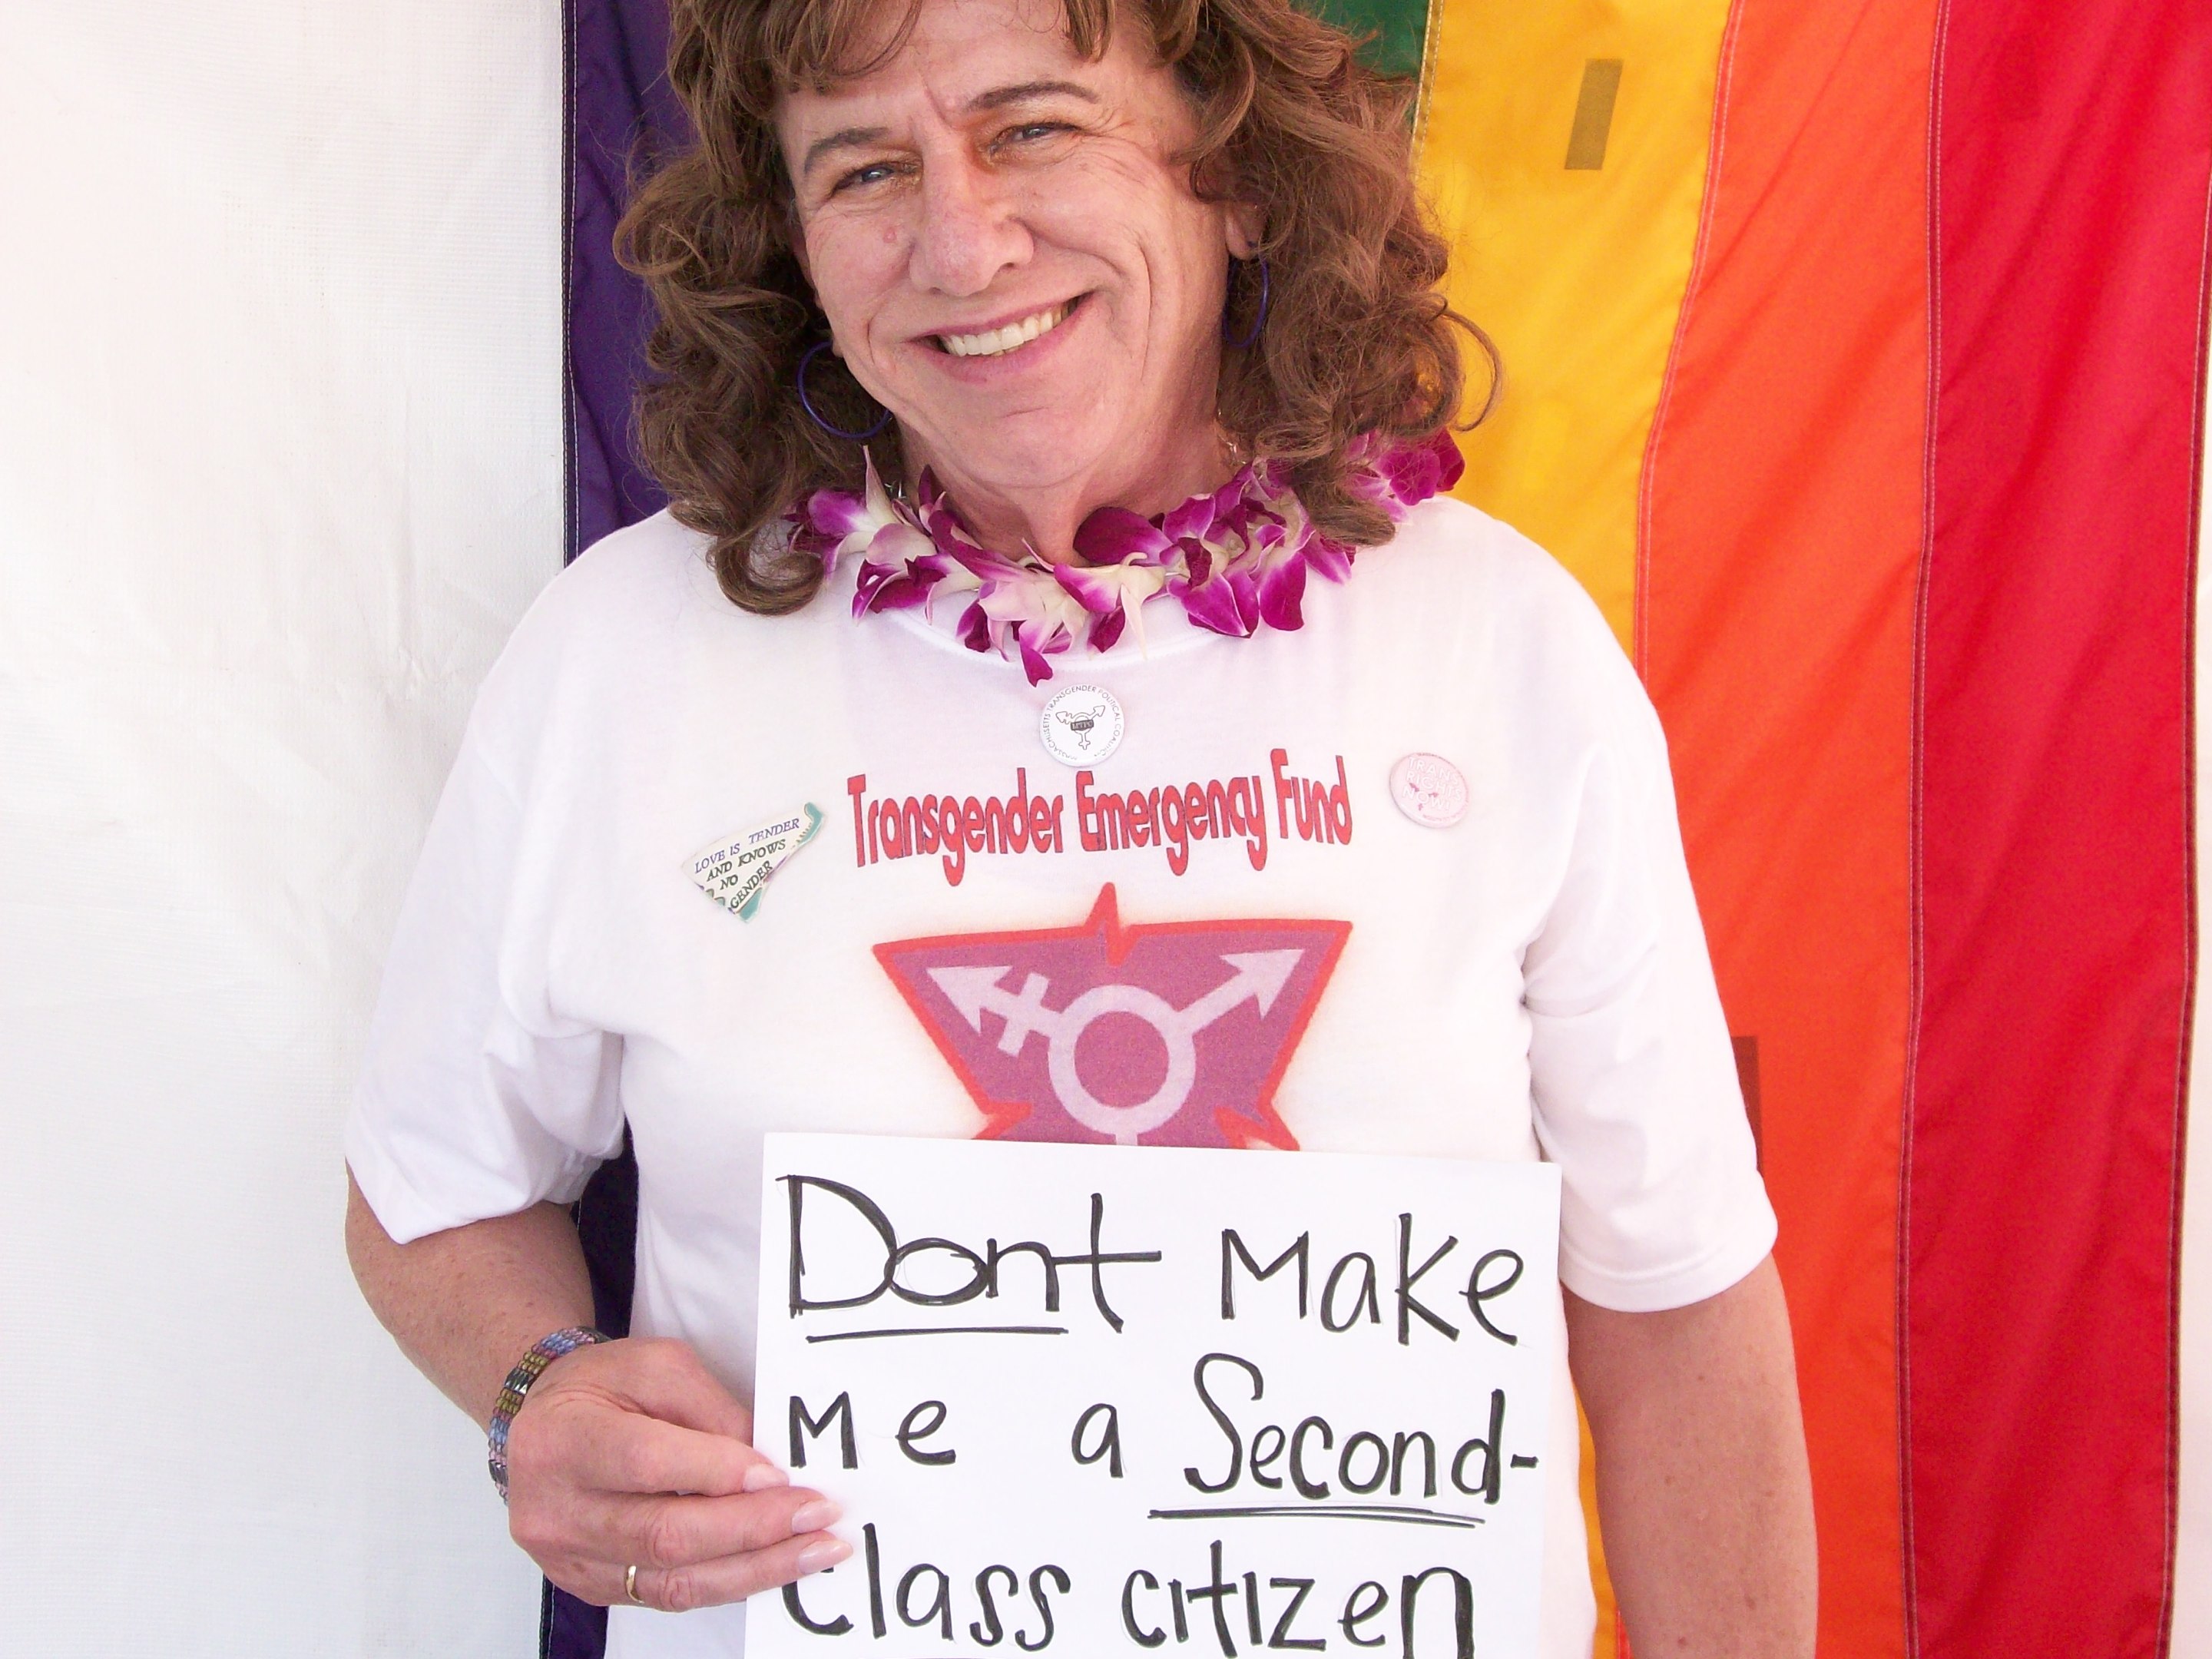 Individual wearing Transgender Emergency Fund shirt smiles in front of rainbow banner with sign reading "Don't Make Me a Second-Class Citizen."